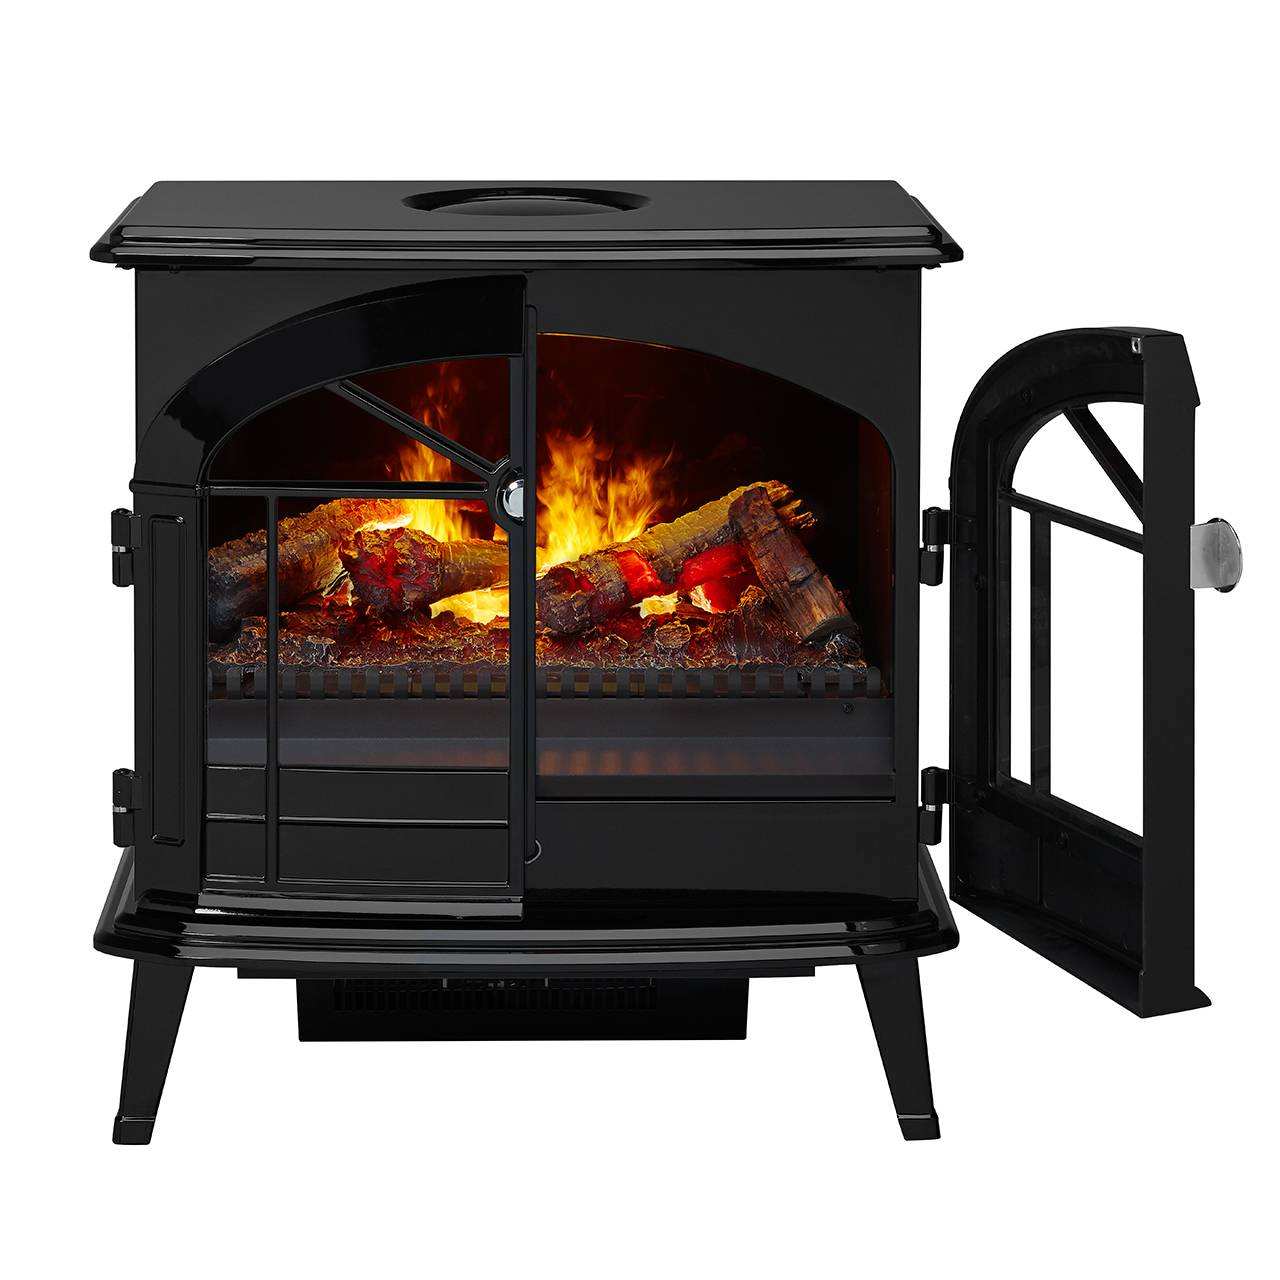 dimplex stoves new dimplex electric fireplaces opti myst products of dimplex stoves